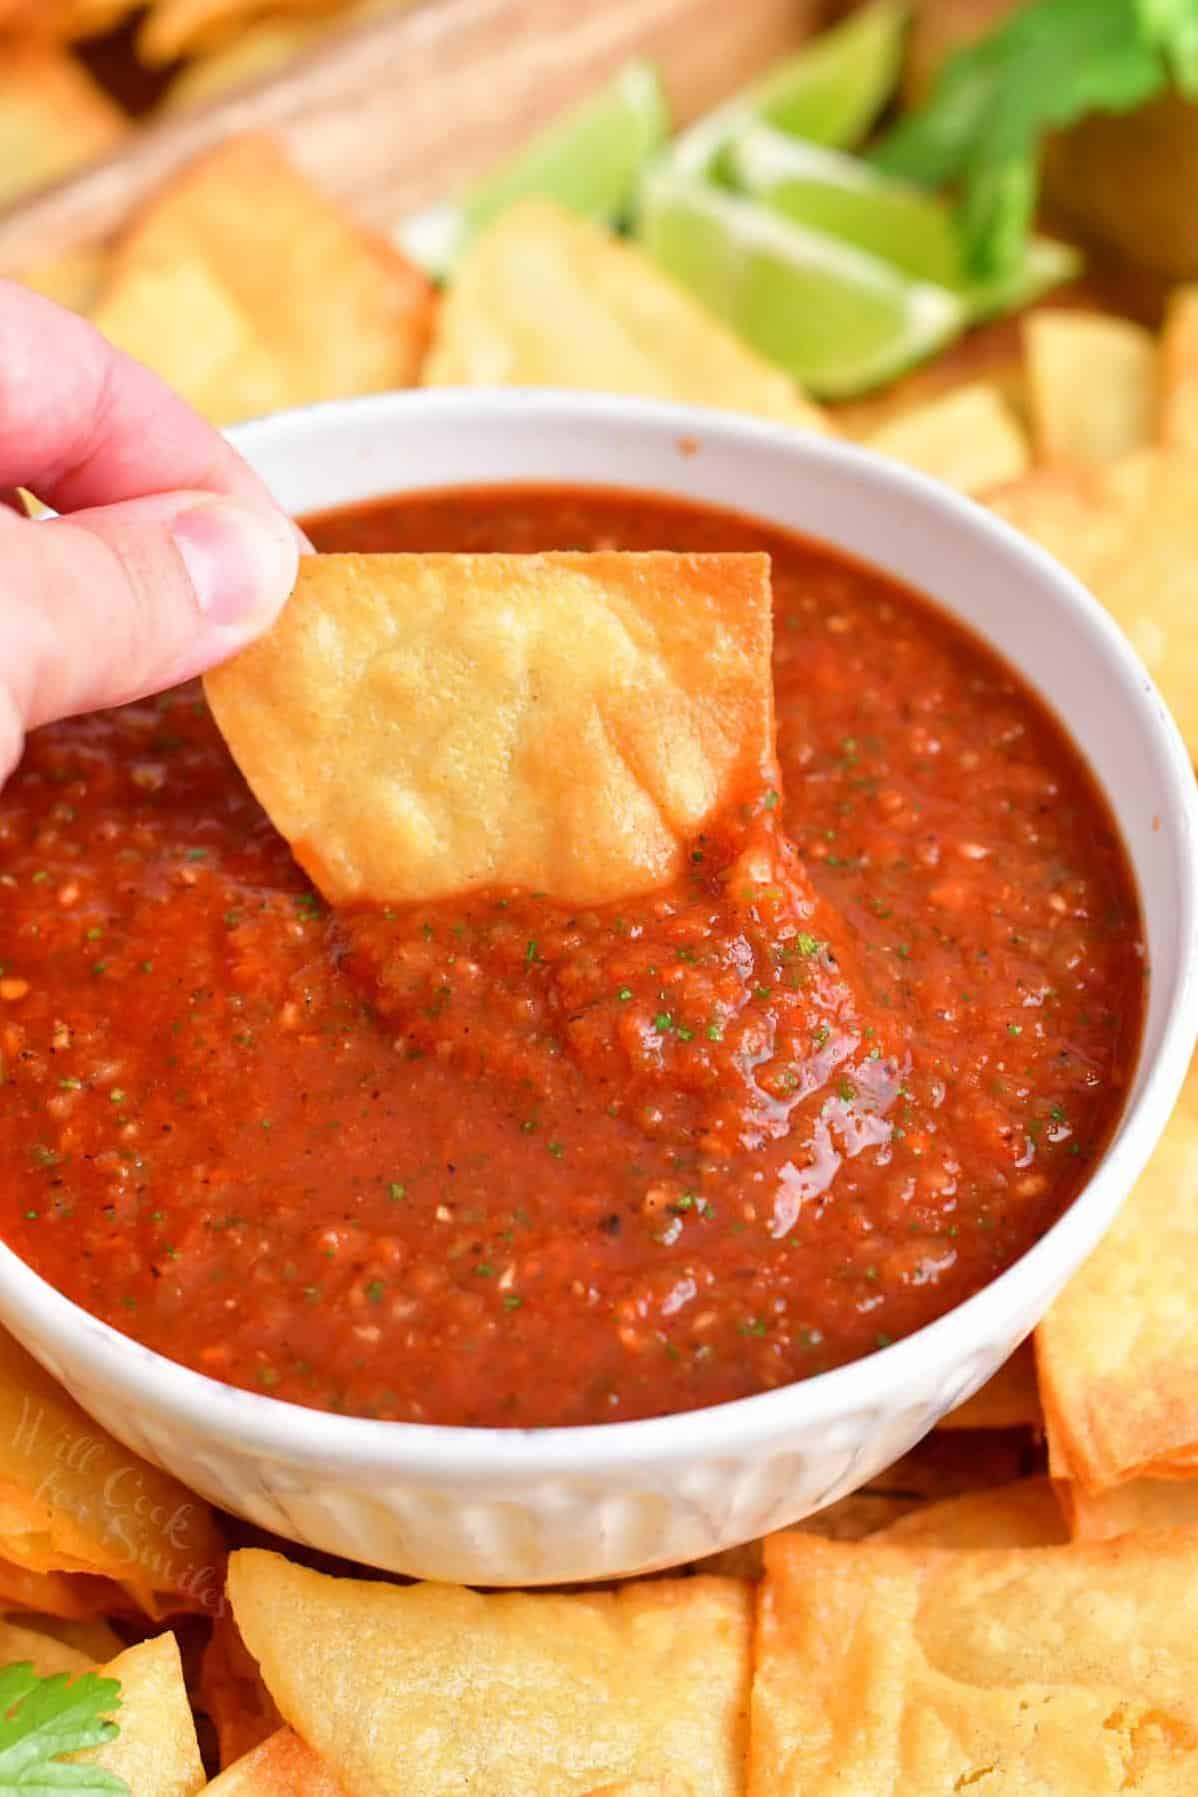  A colorful mix of ingredients will make your salsa look as good as it tastes.